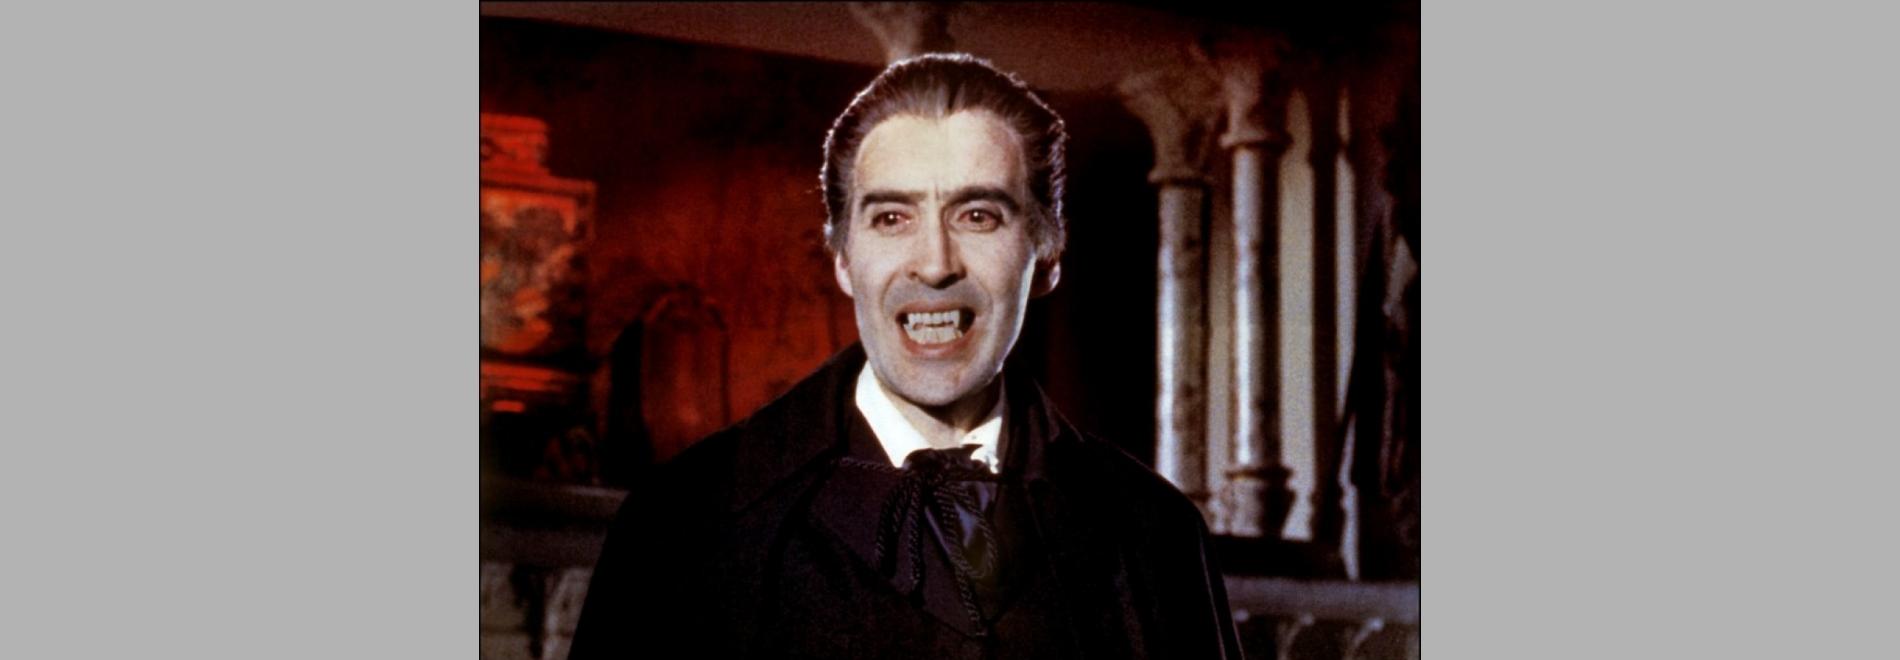 Dracula, Prince of Darkness (Terence Fisher, 1966)